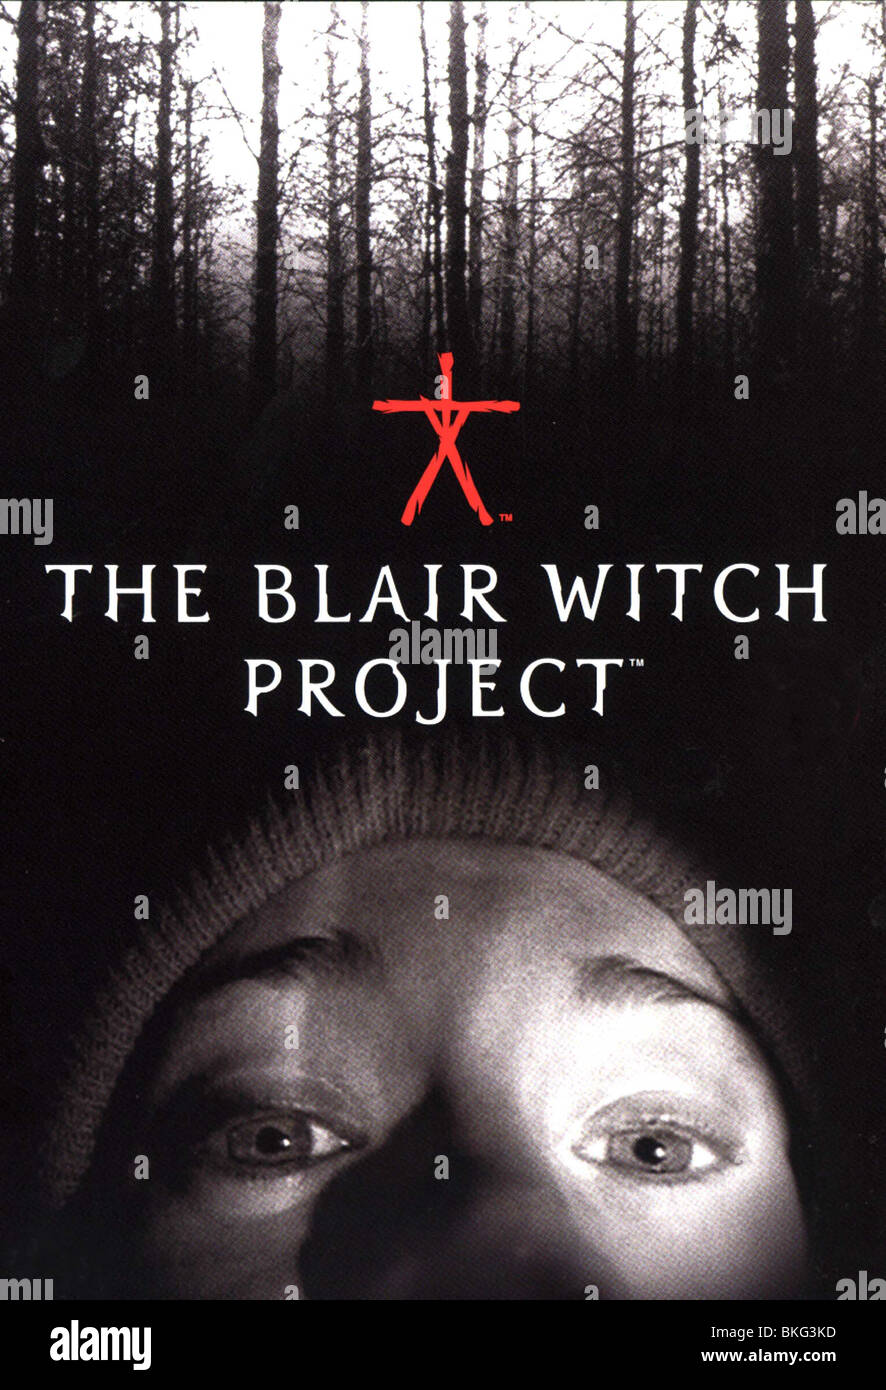 THE BLAIR WITCH PROJECT (1999) POSTER BWP 001 DVDS Stock Photo - Alamy